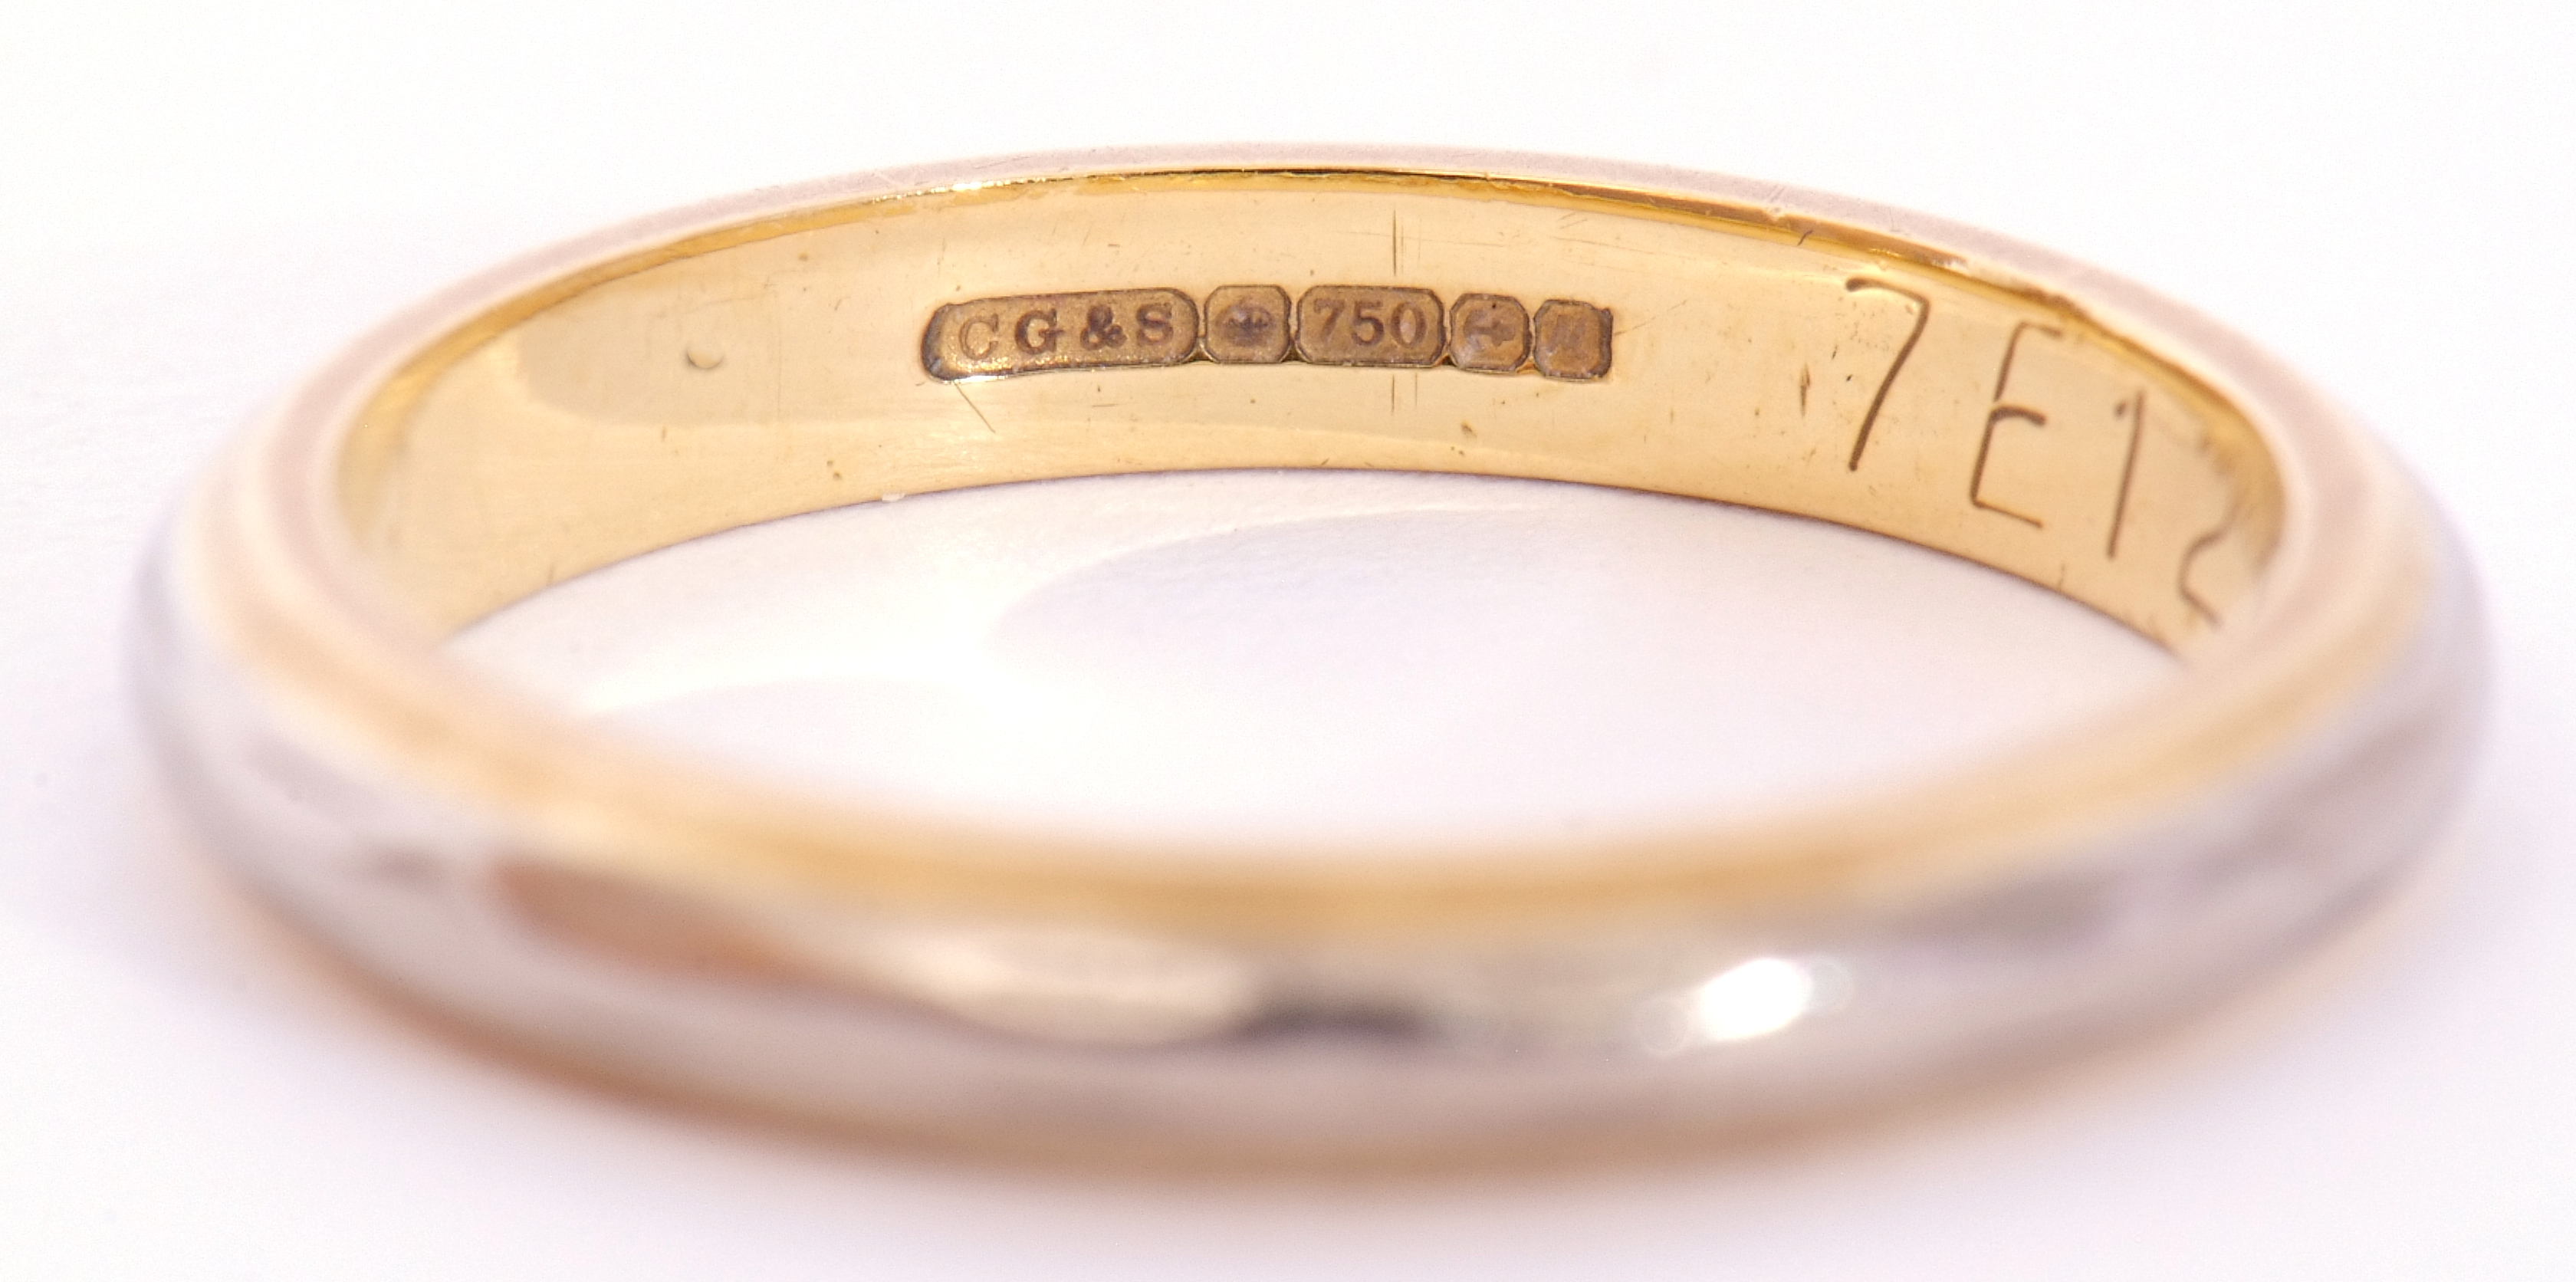 18ct gold two-tone wedding band with a faceted design, size I/J - Image 4 of 4